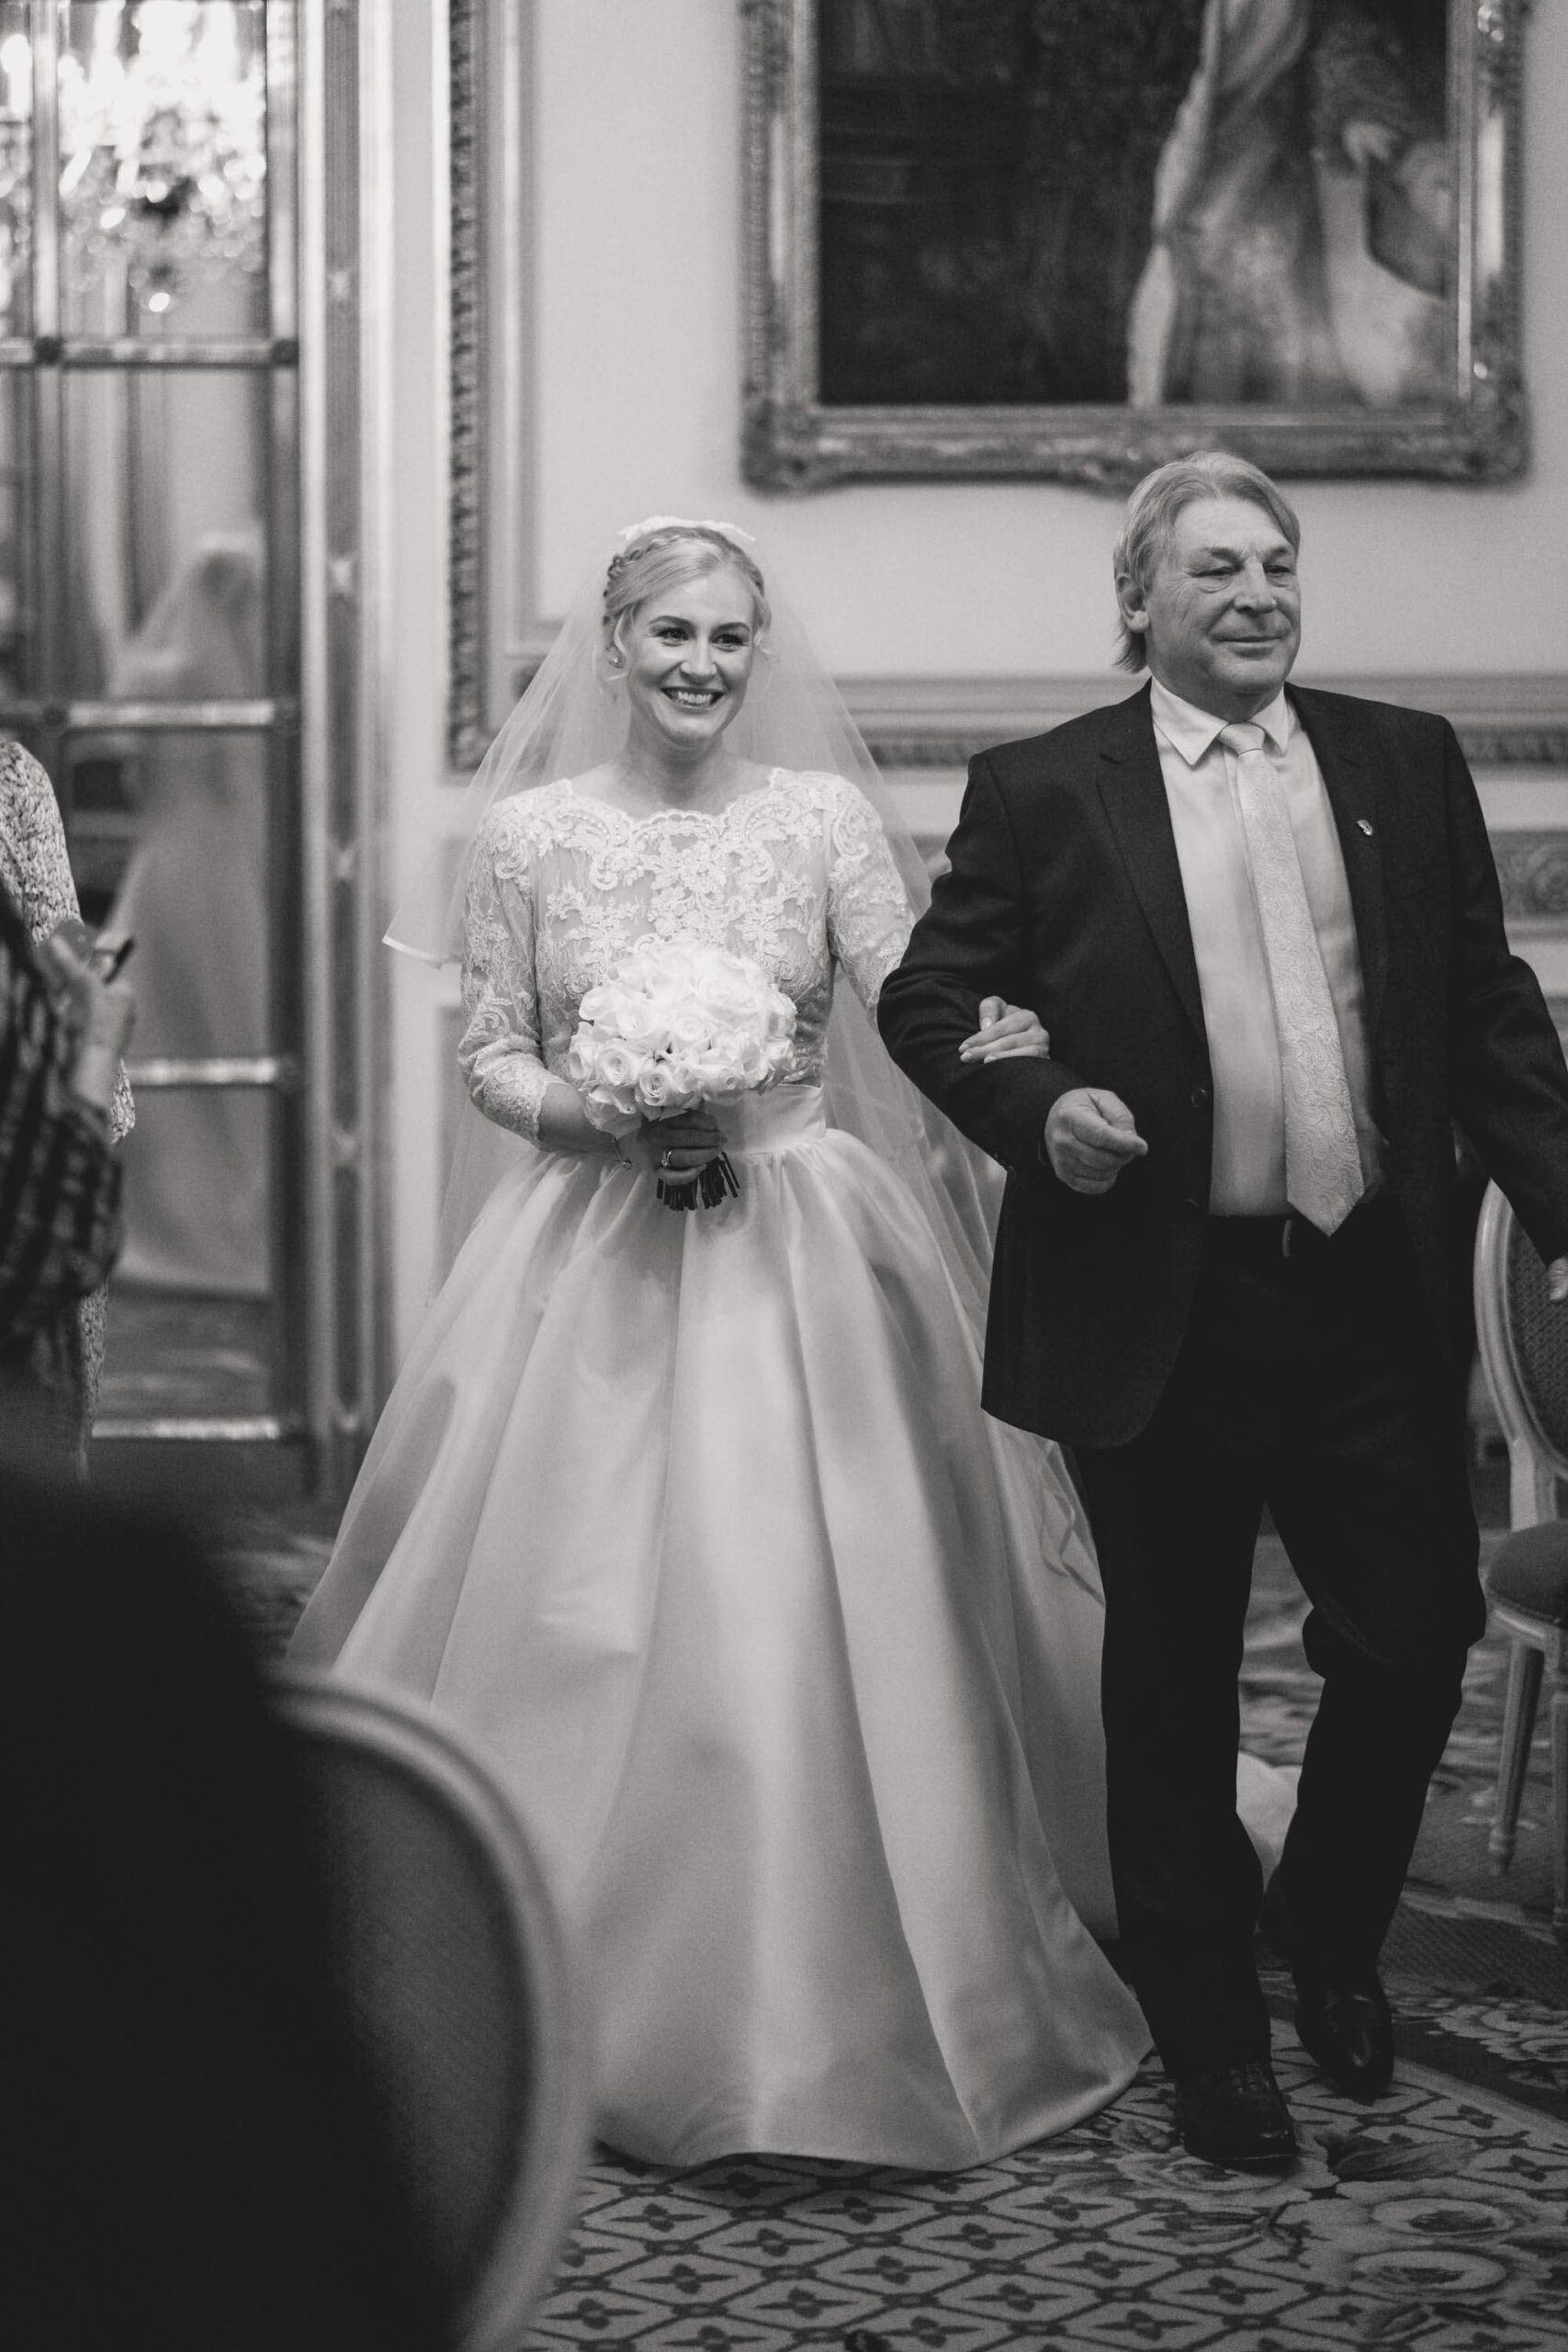 Bride walking down the aisle with her father at the Ritz hotel in London.